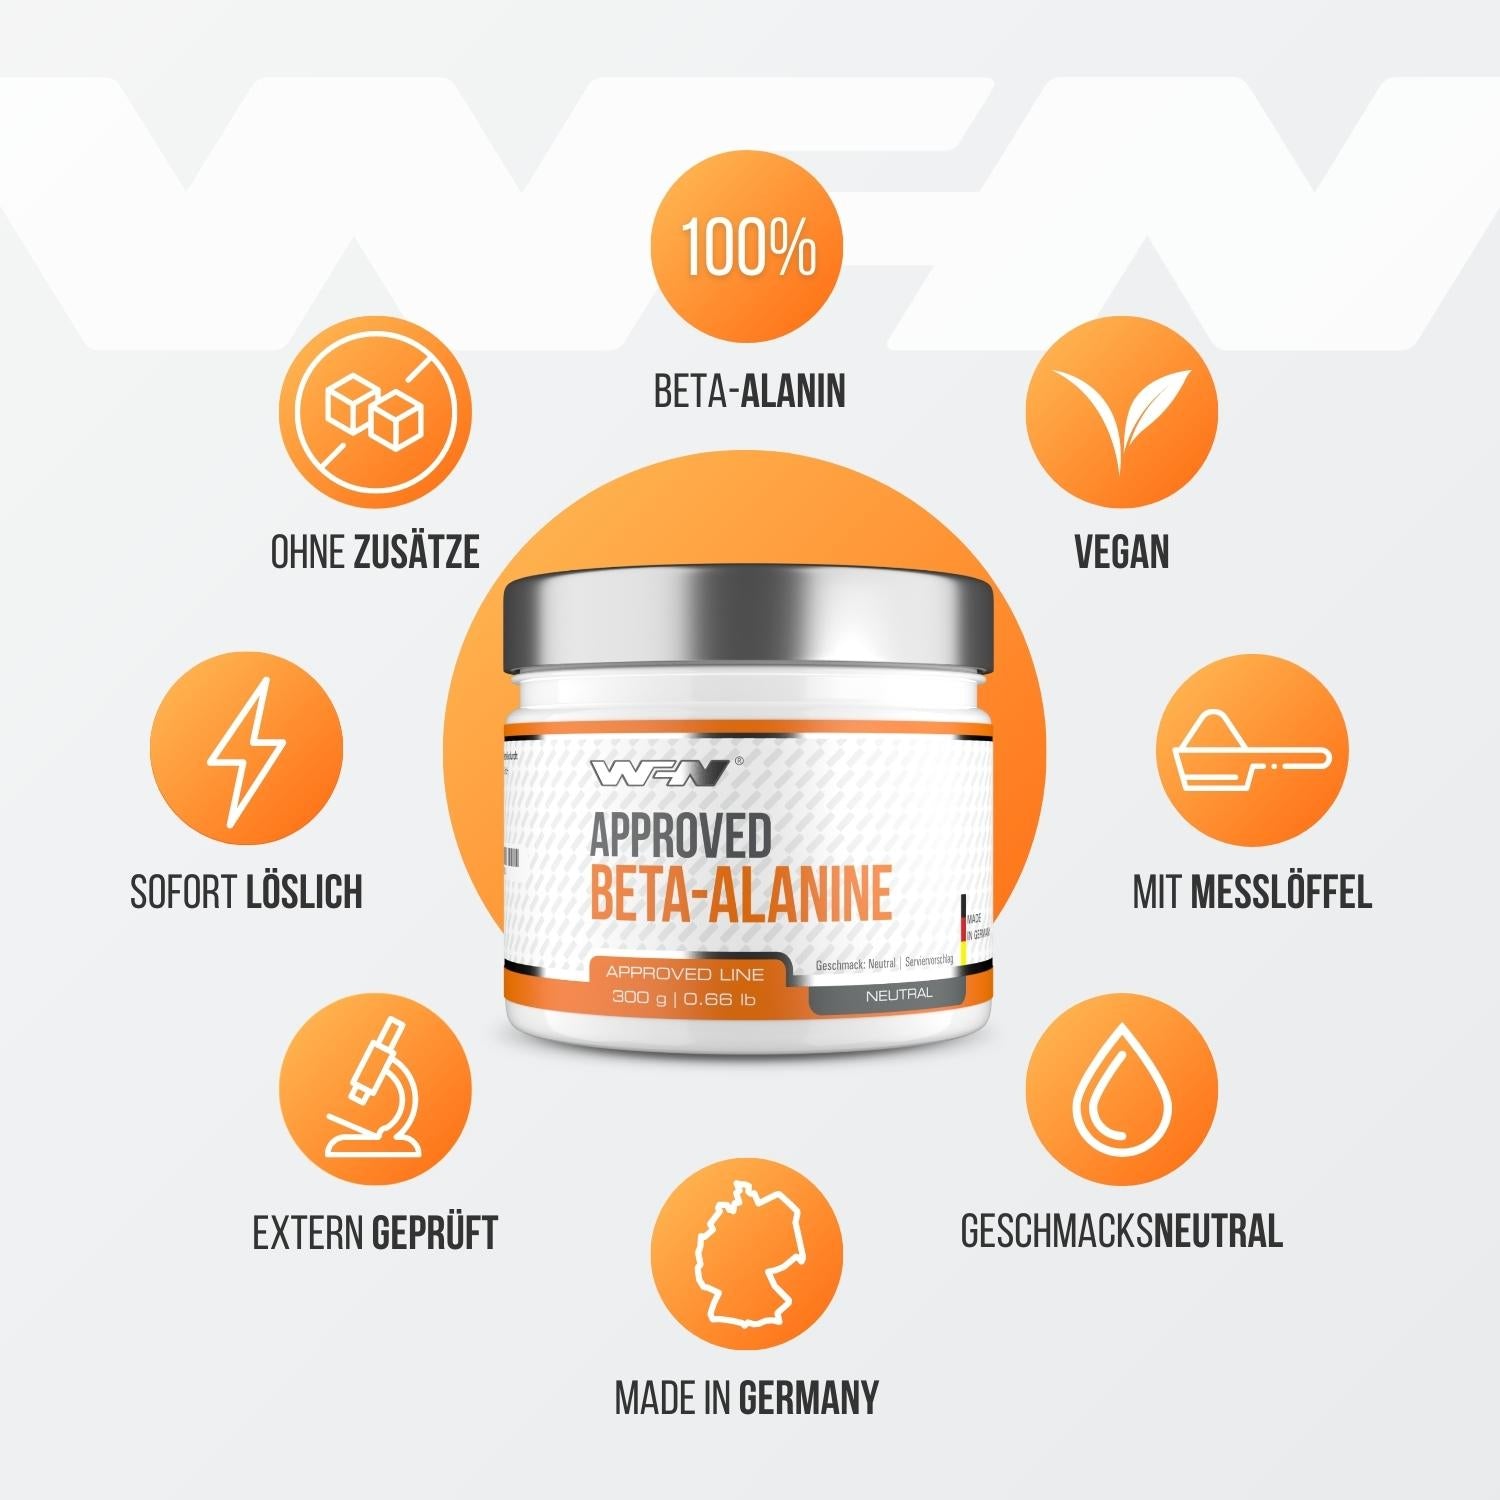 Approved Beta-Alanine